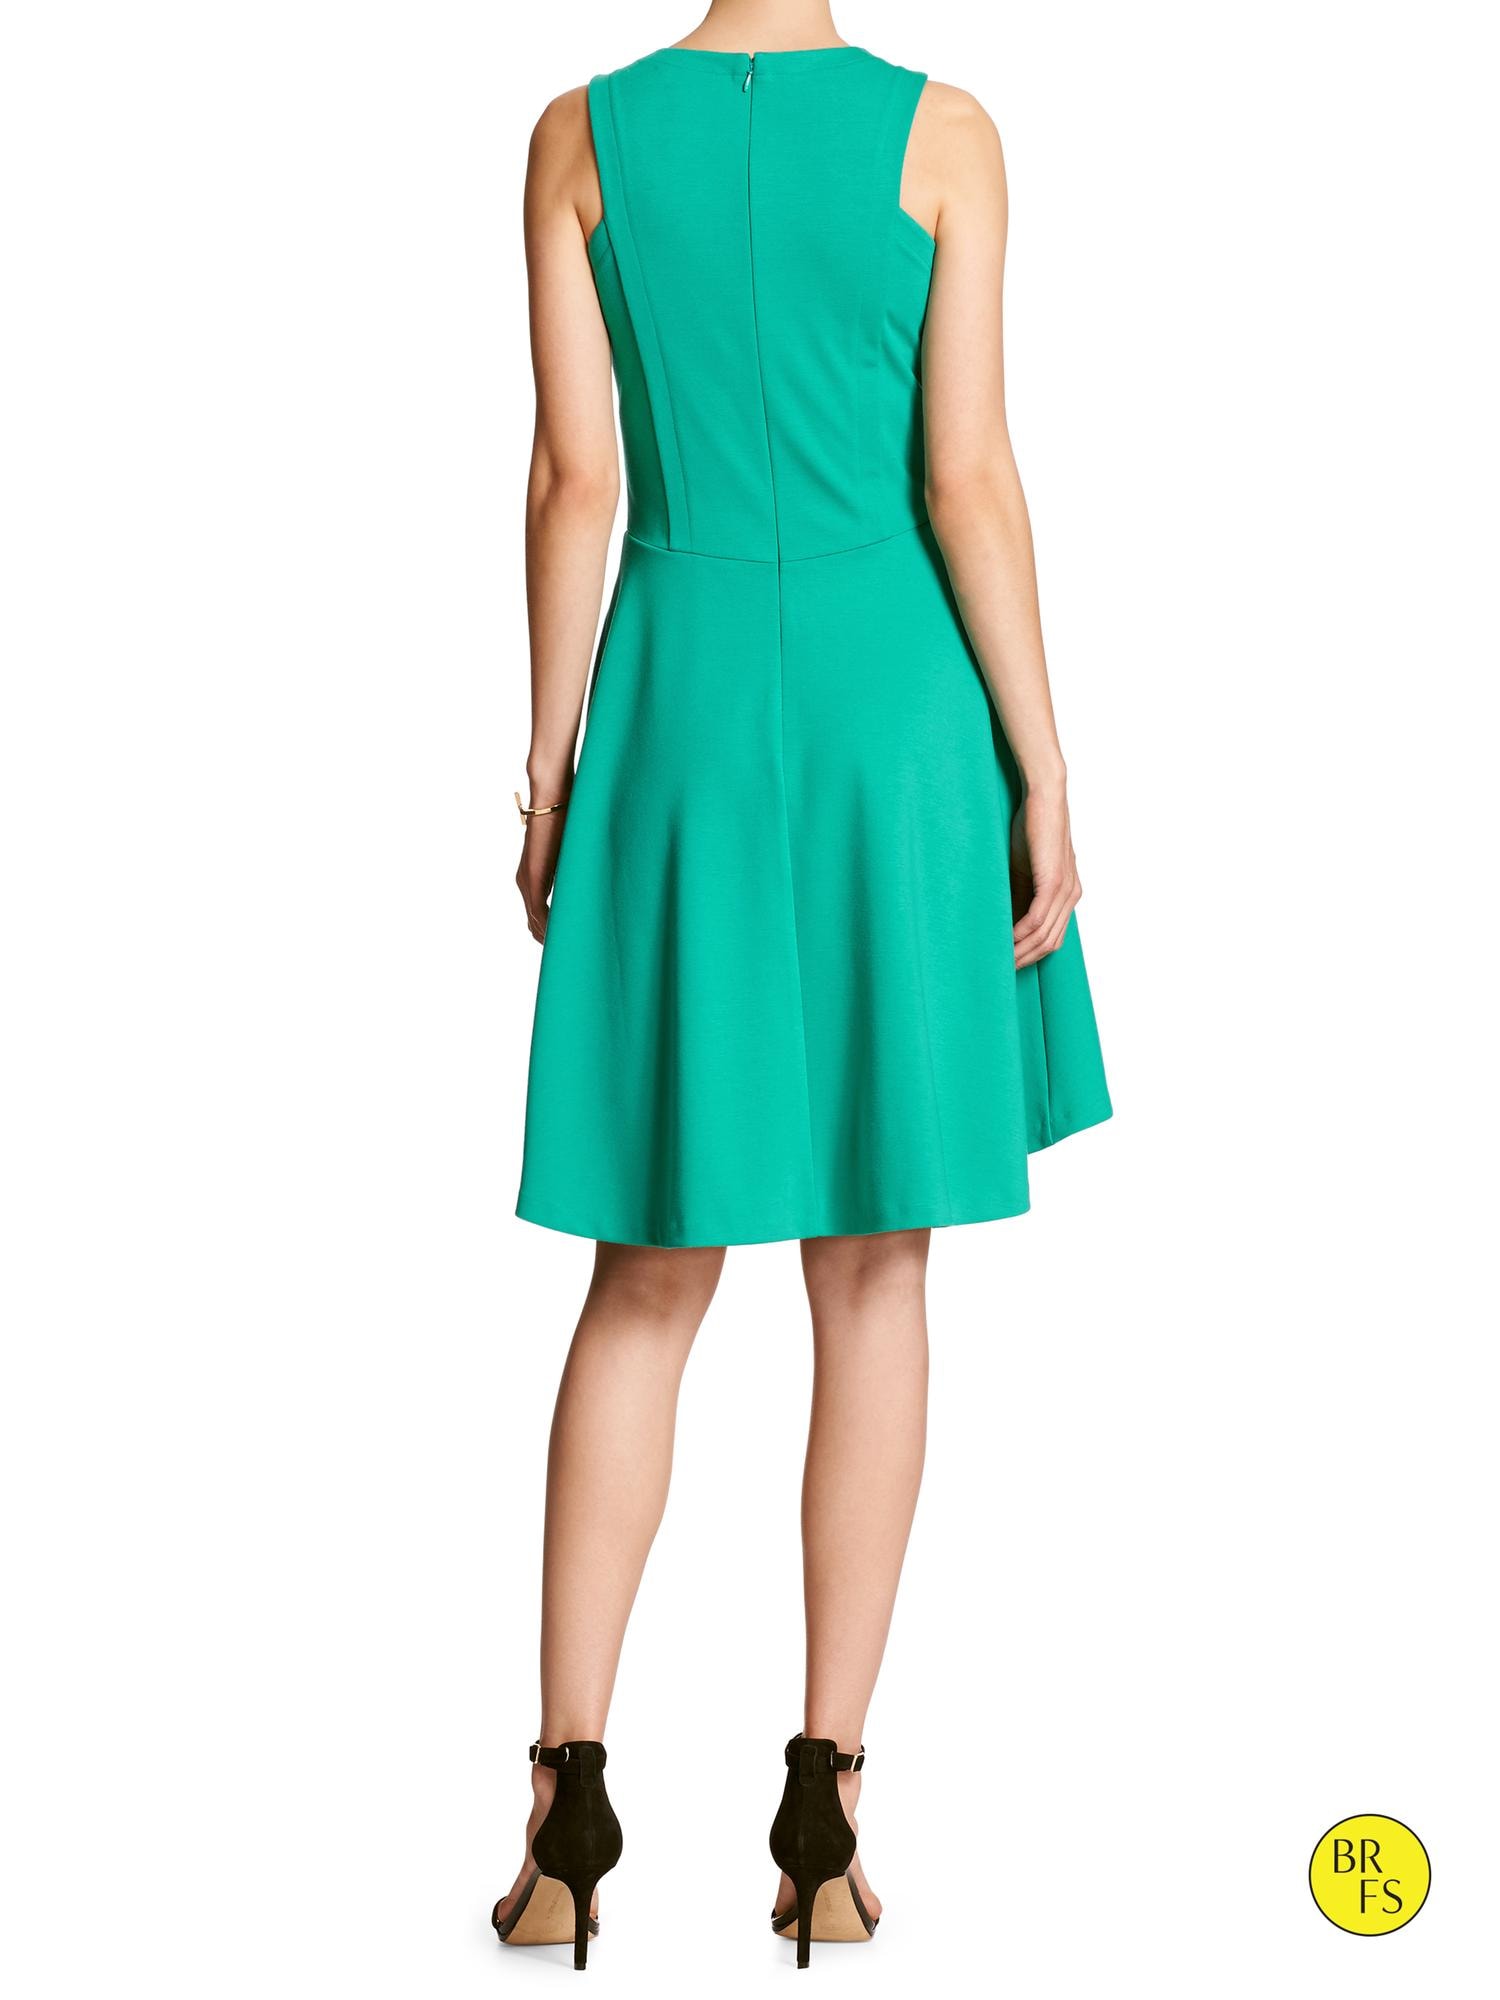 Factory Fit and Flare Dress